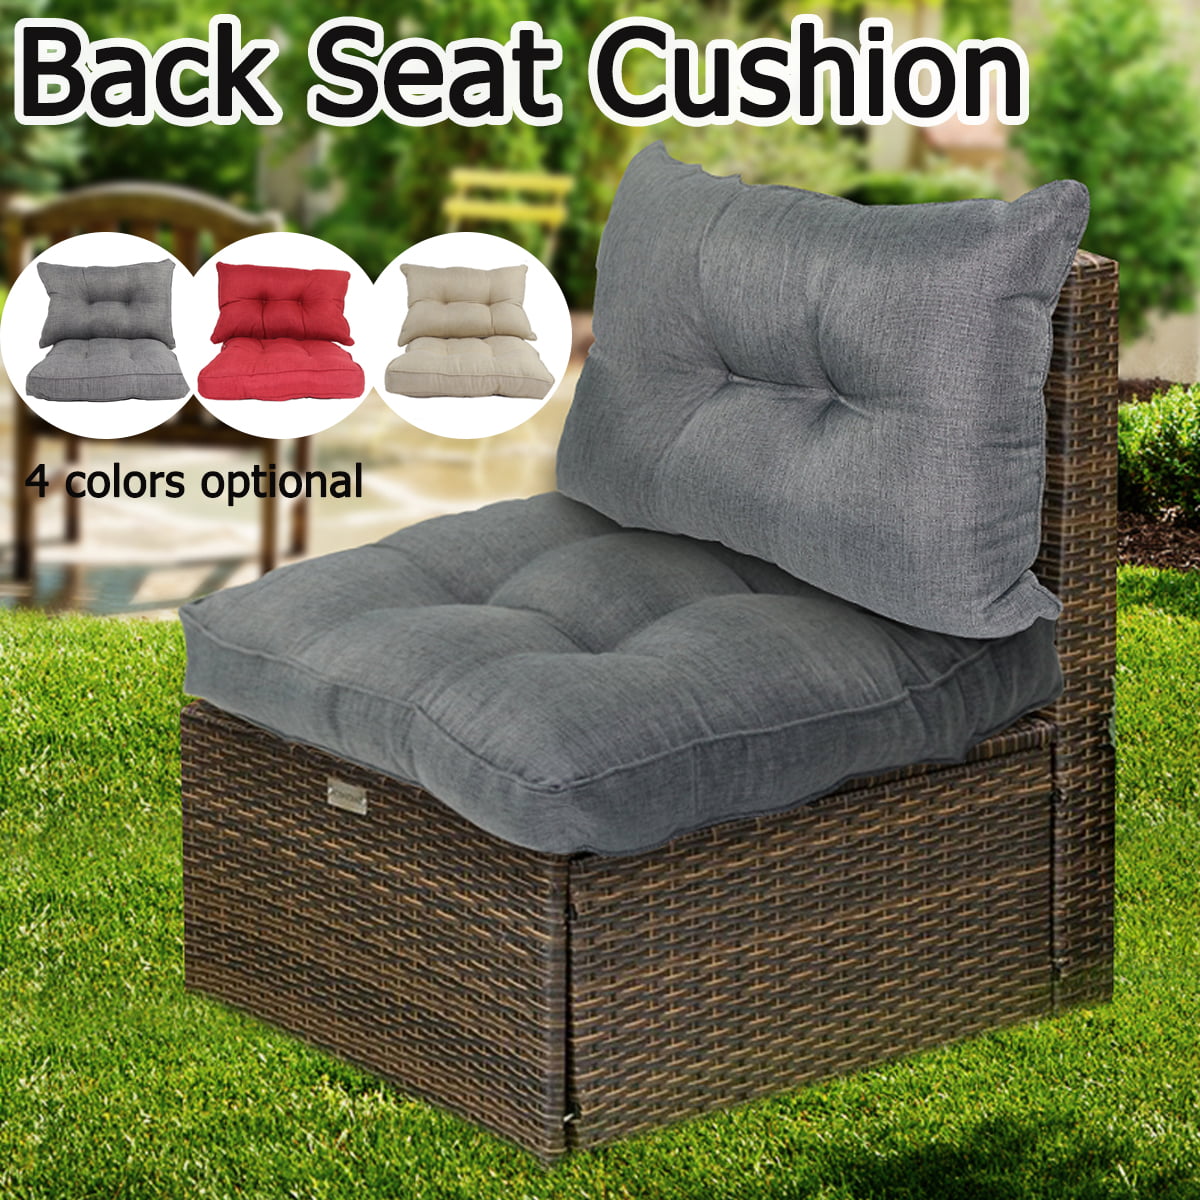 Patio Chair Garden Seats Furniture, Replacement Cushions For Outdoor Furniture Uk